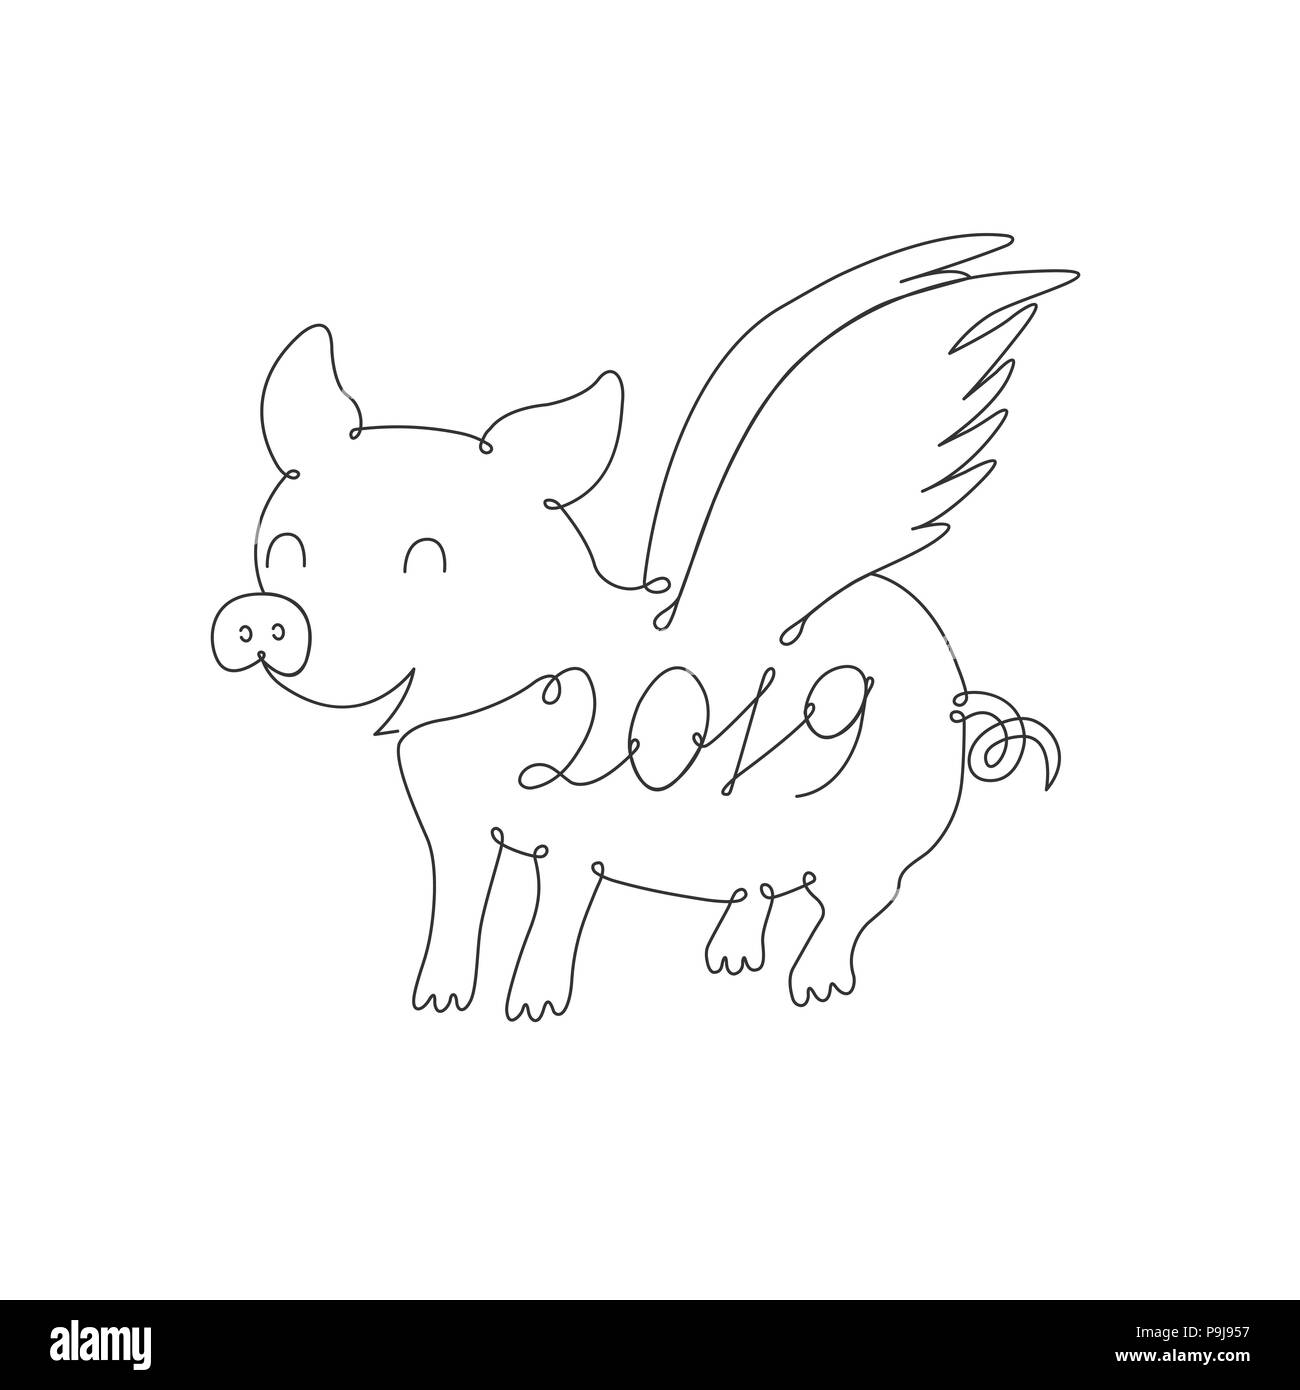 The symbol of the year drawn by one line Stock Vector